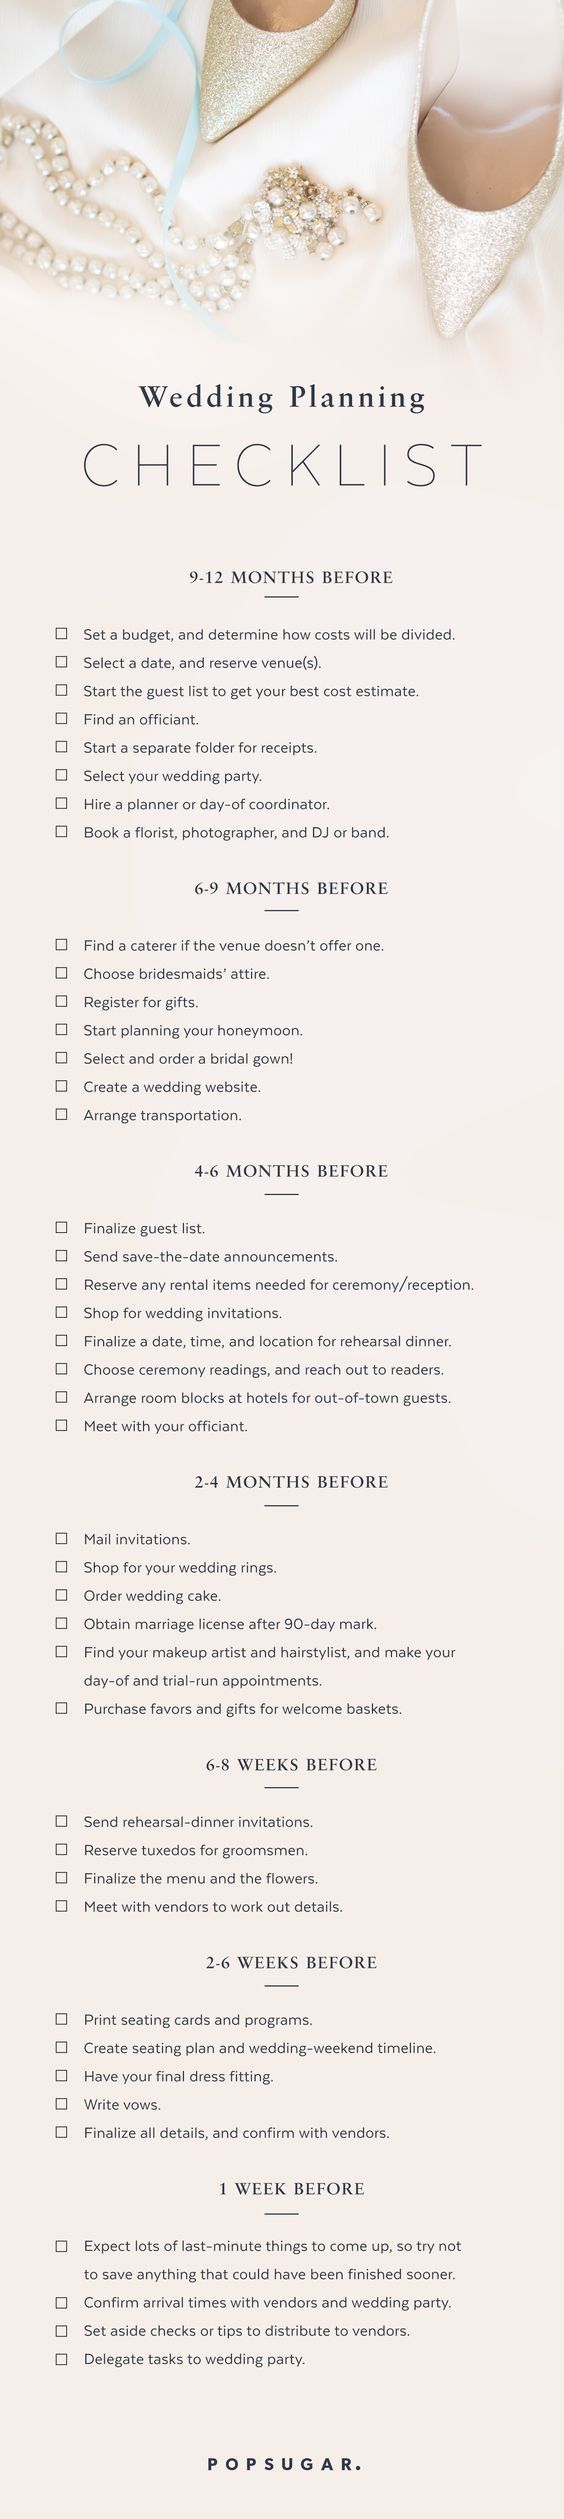 Its overwhelming when youre not sure whats next on the to-do list, so Ive created a general timeline for brides out there who need